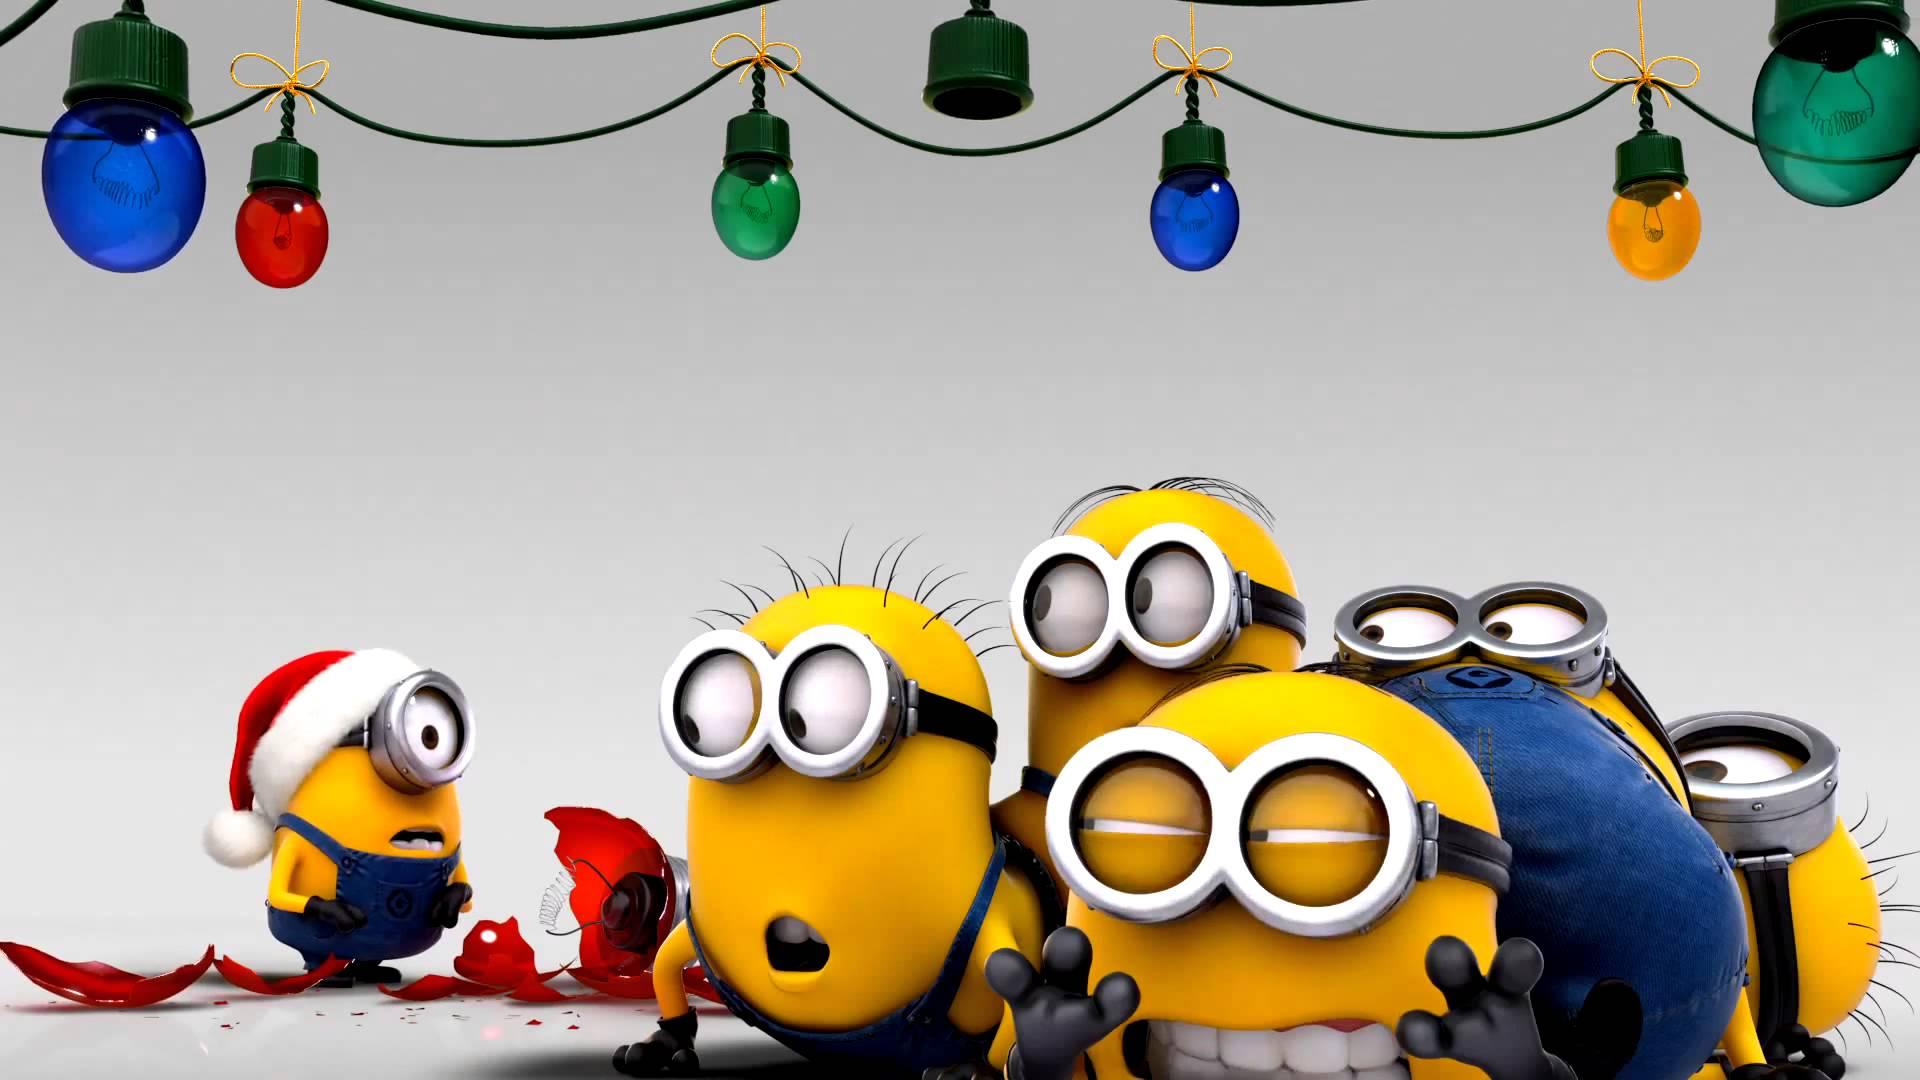 IPhone 4S Bob the Minion iPhone 5 iPhone X, others, desktop Wallpaper, mobile  Phones, despicable Me png | PNGWing